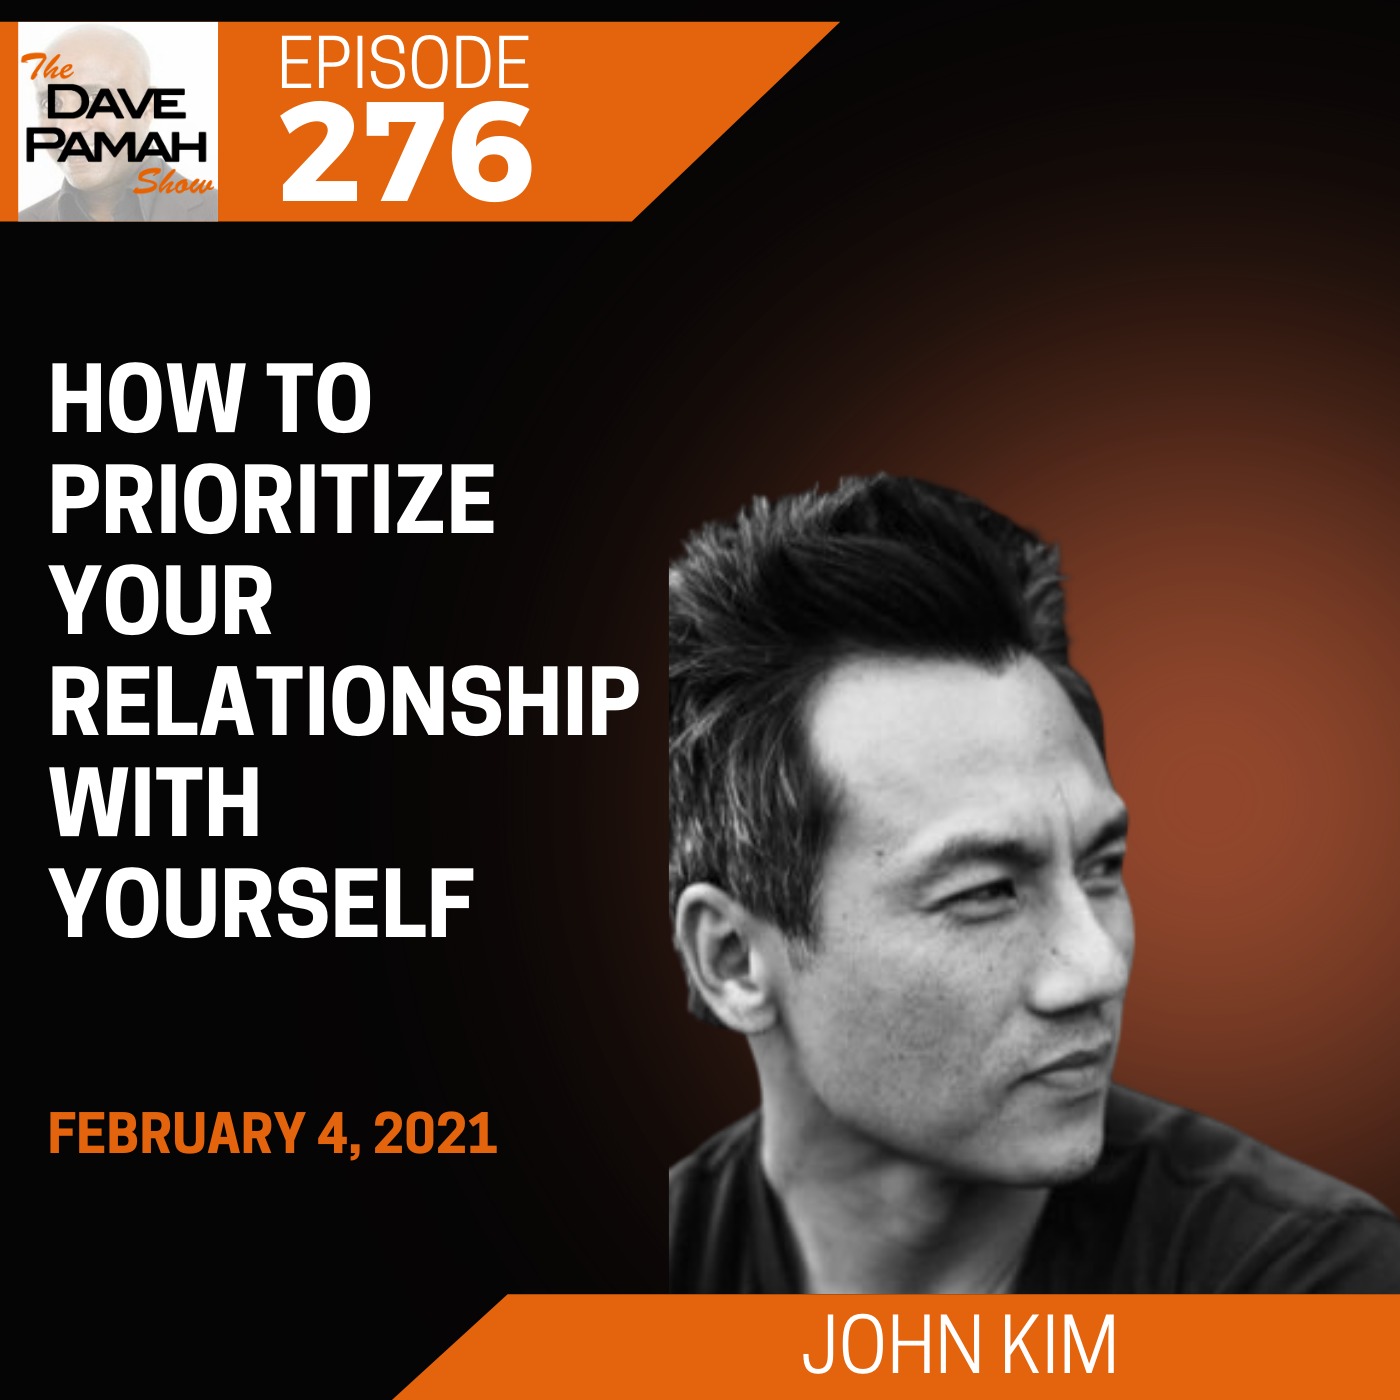 How to prioritize your relationship with yourself with John Kim